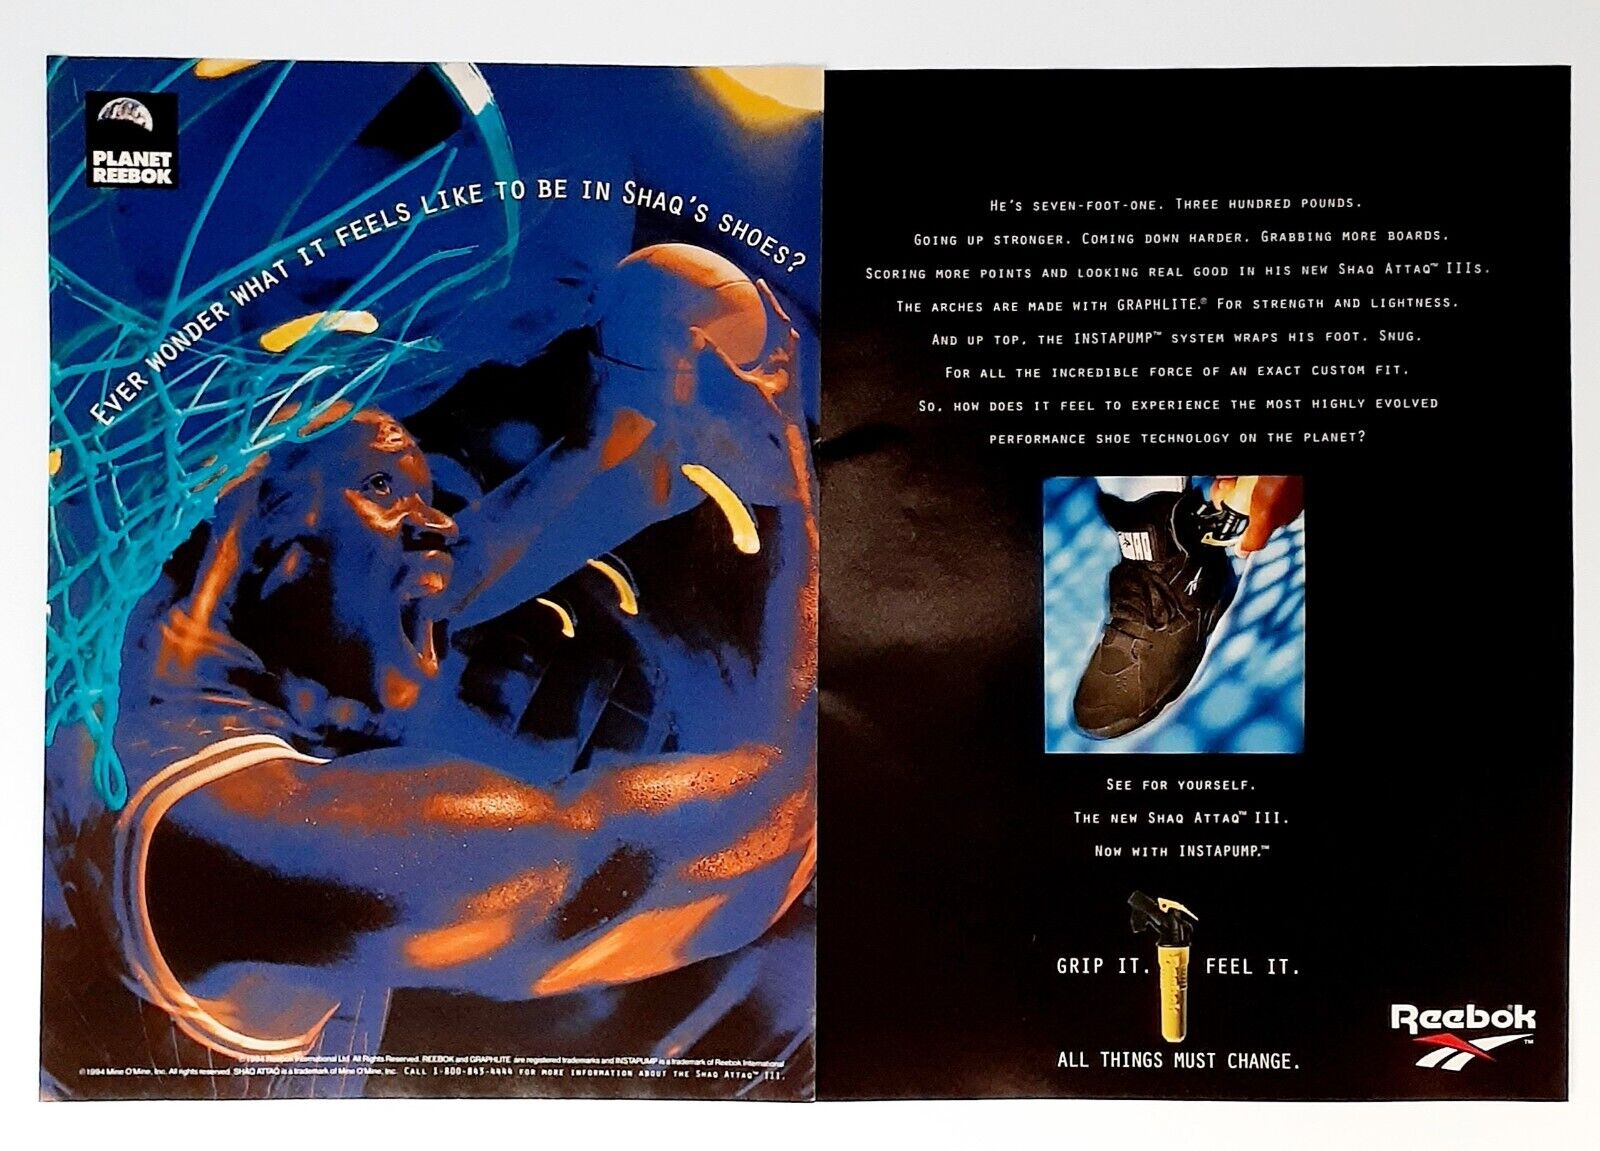 Reebok Shaquille O’Neal ad vintage 1994 advertisement